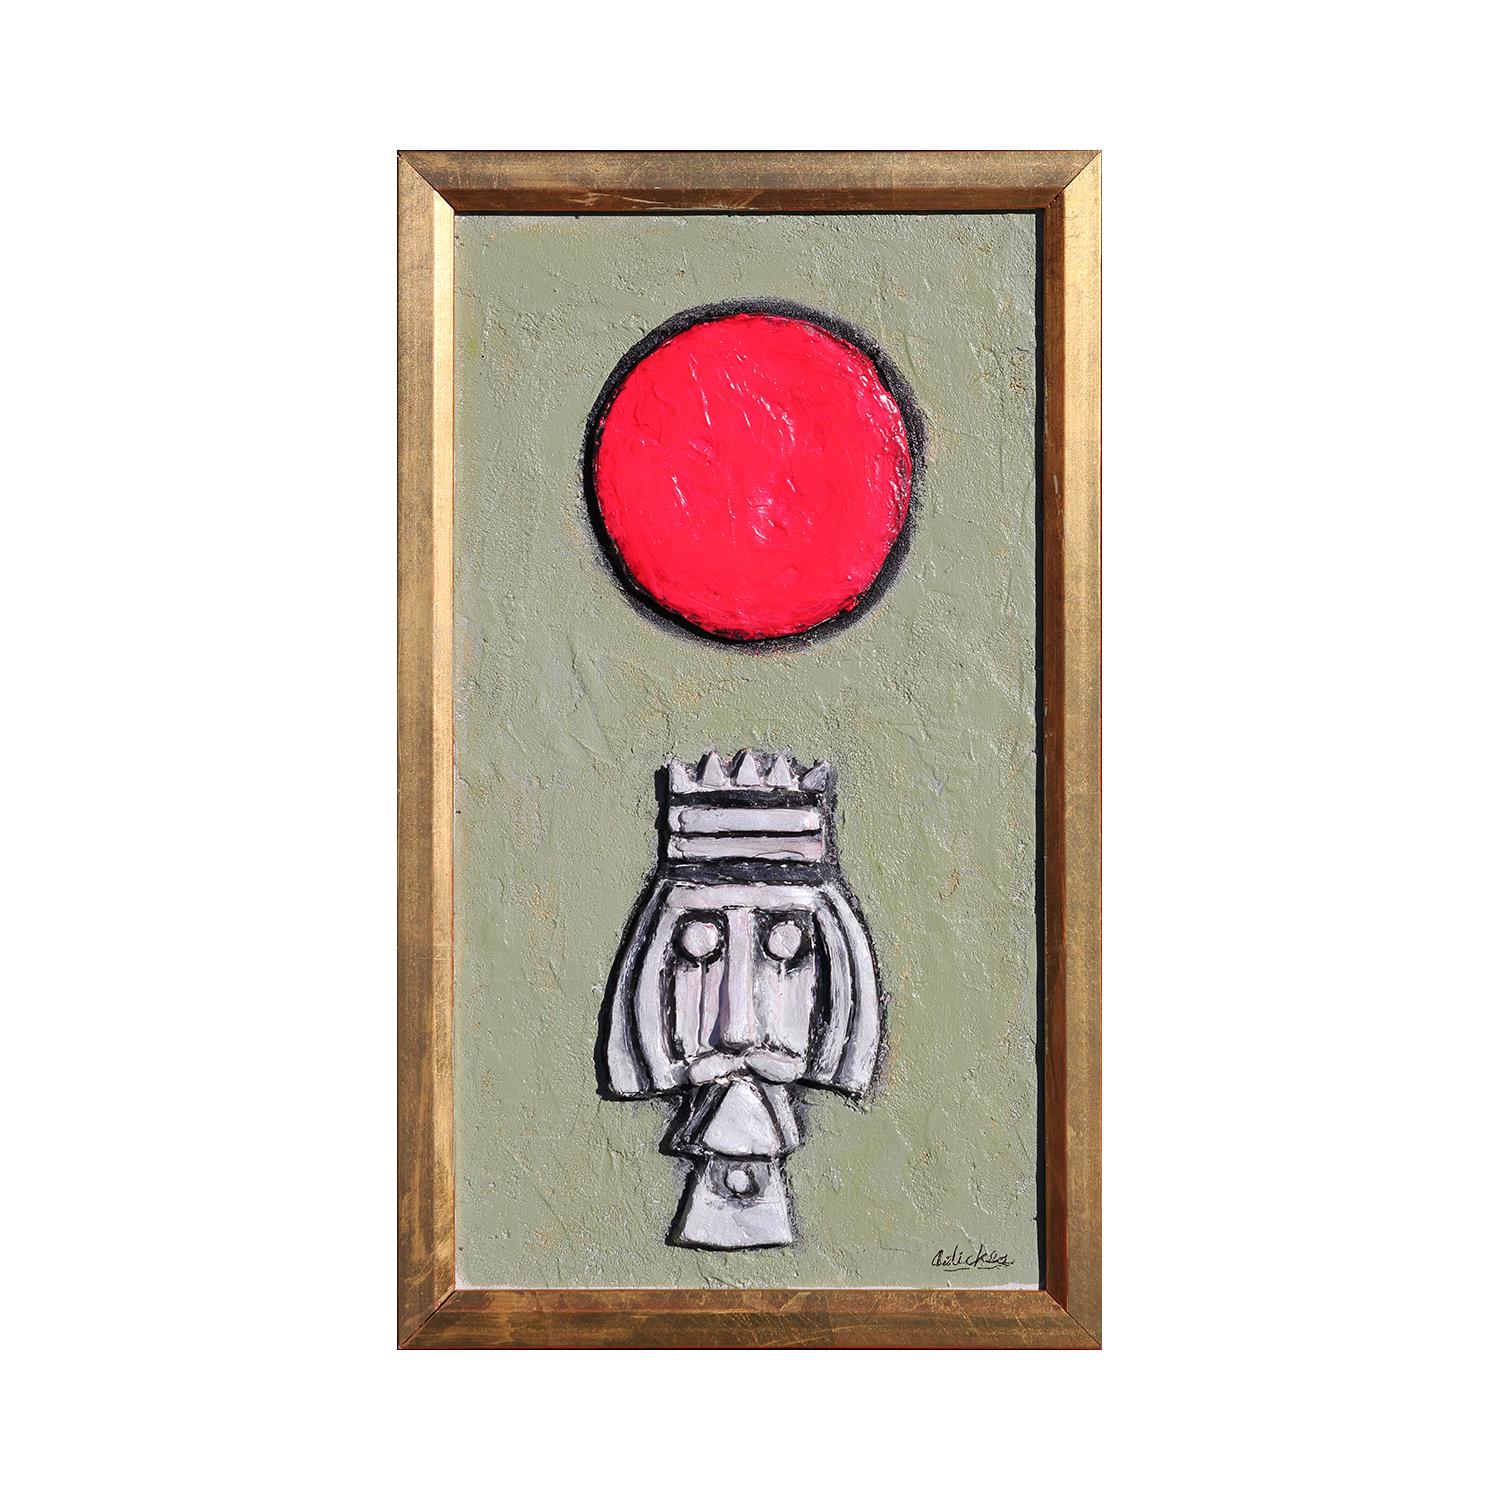 Small longitudinal abstract figurative mixed media painting depicting a king's head in white & black and a bright red sun against a light sea green background. Signed by artist at the bottom right. Framed in a gold wooden frame.

Dimensions Without